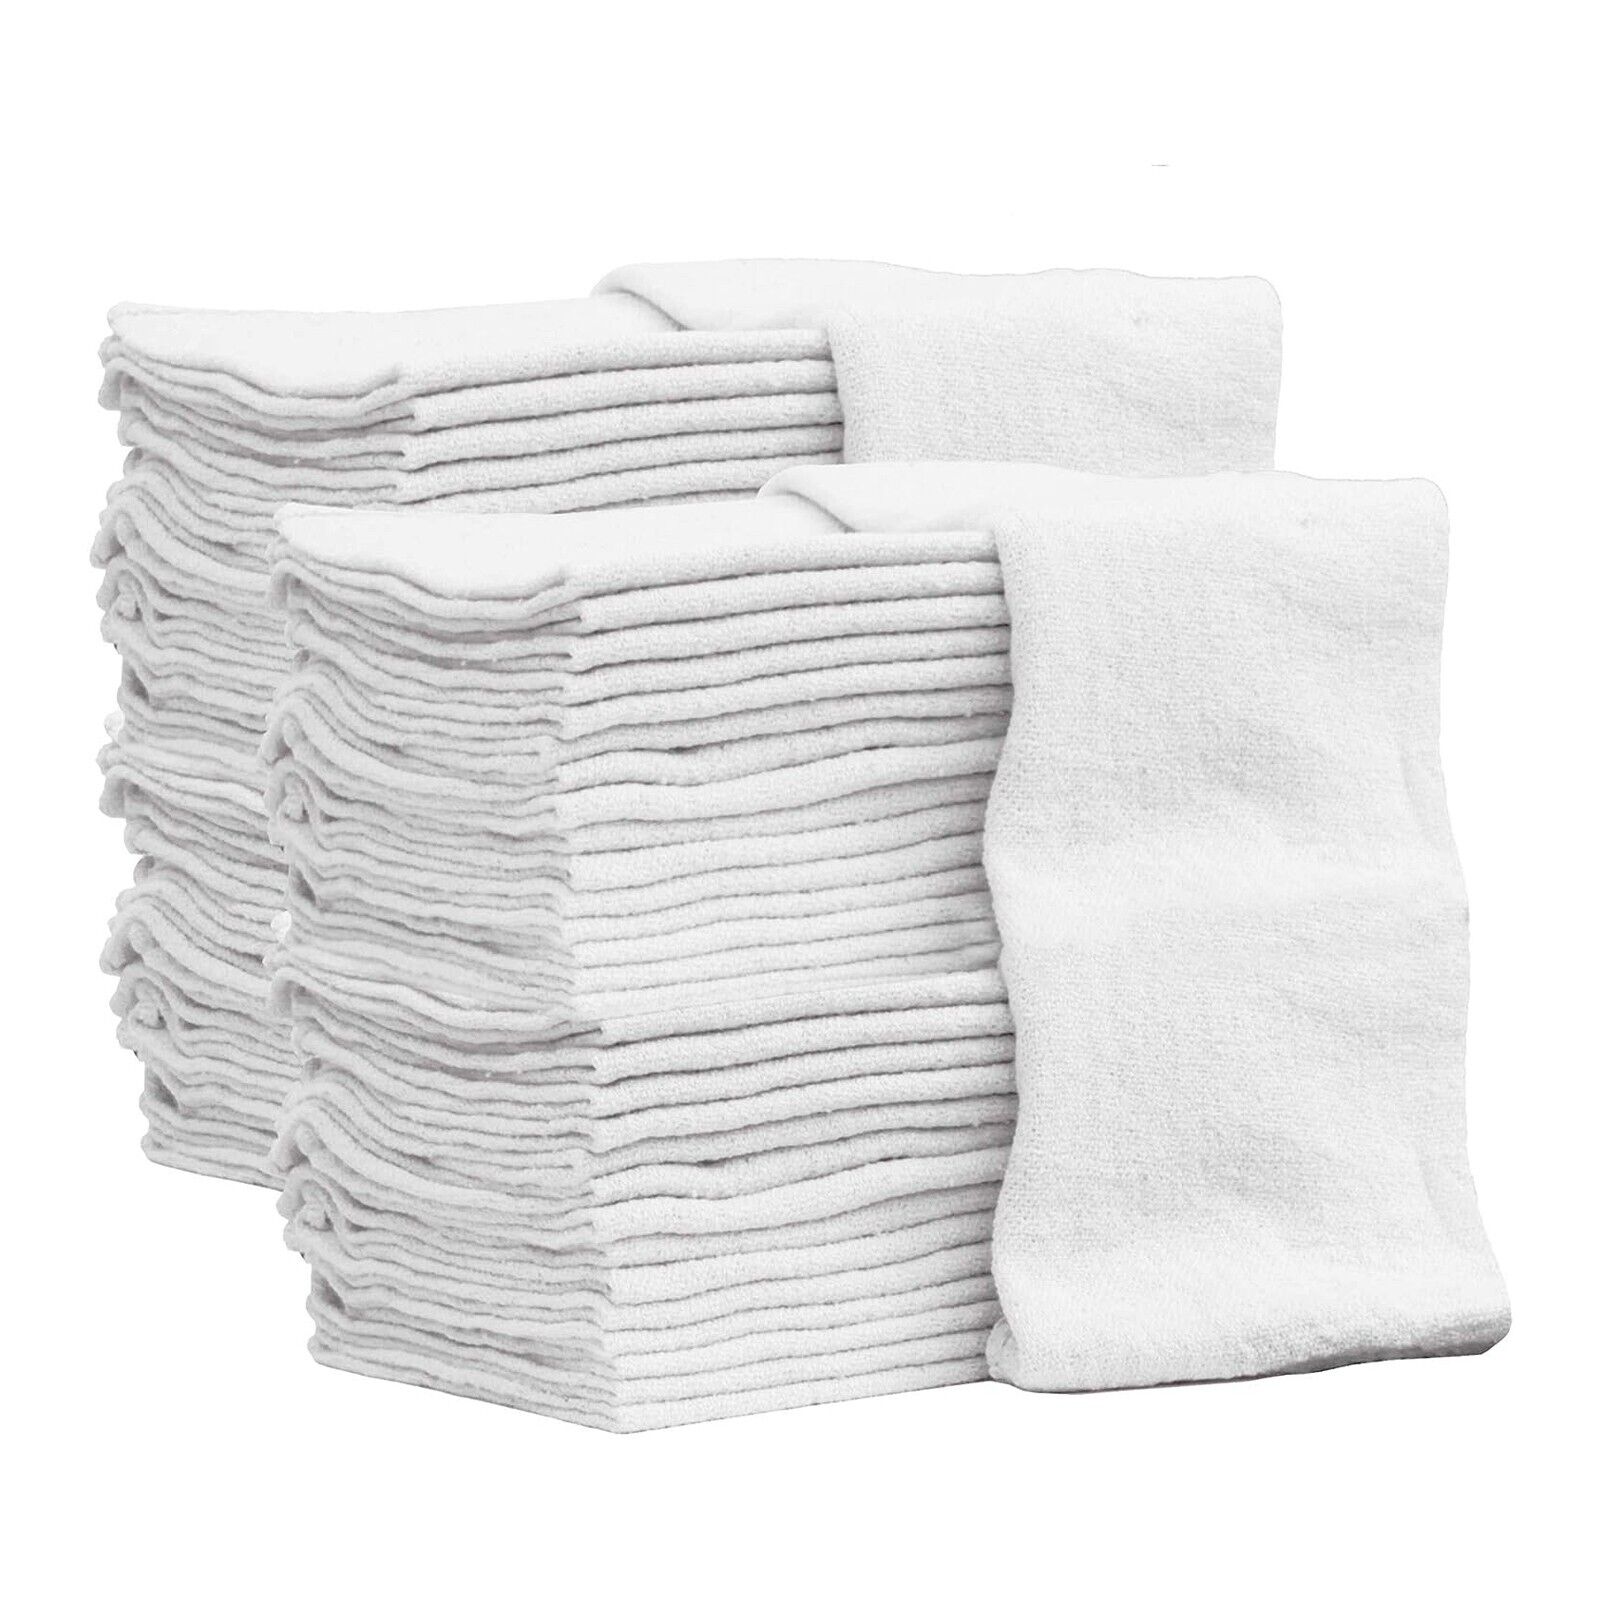 100 New Industrial A-Grade Shop Towels-Cleaning Towels White-Multipurpose Cloth